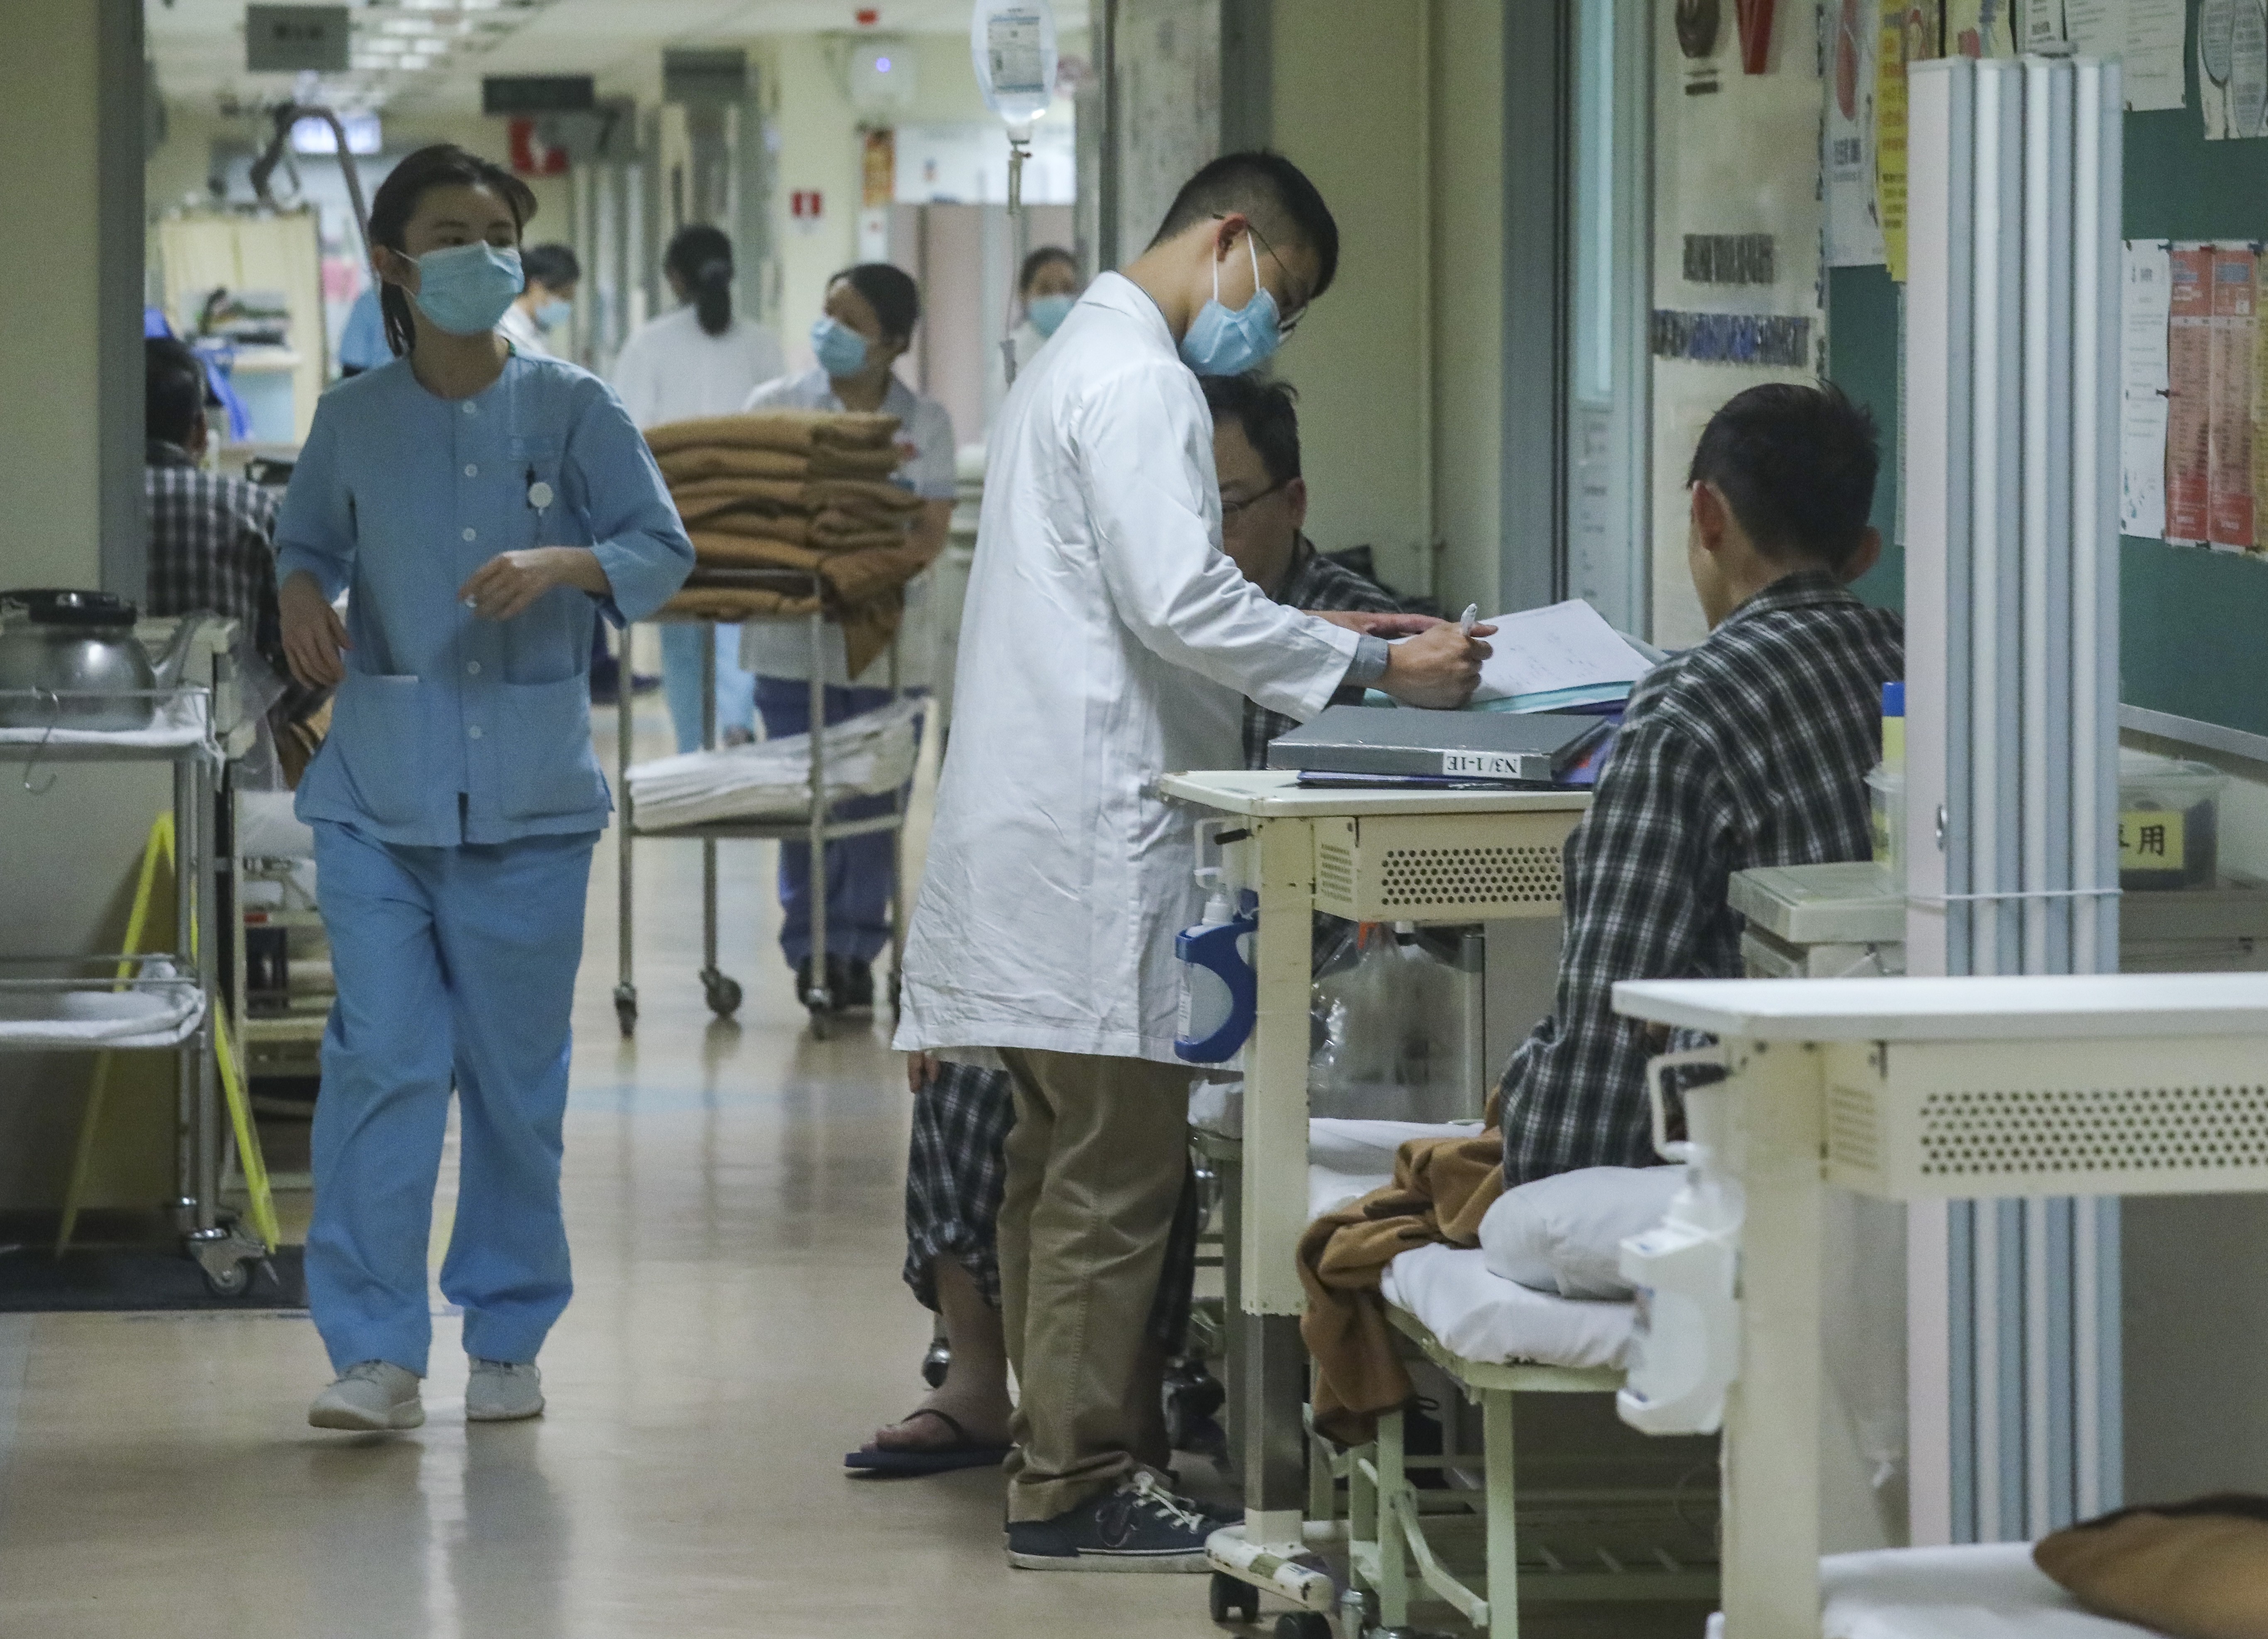 Medical staff at work at Kwong Wah Hospital in Yau Ma Tei amid the winter flu outbreak in January. The city’s public hospitals have seen occupancy rates of over 100 per cent. Photo: Nora Tam